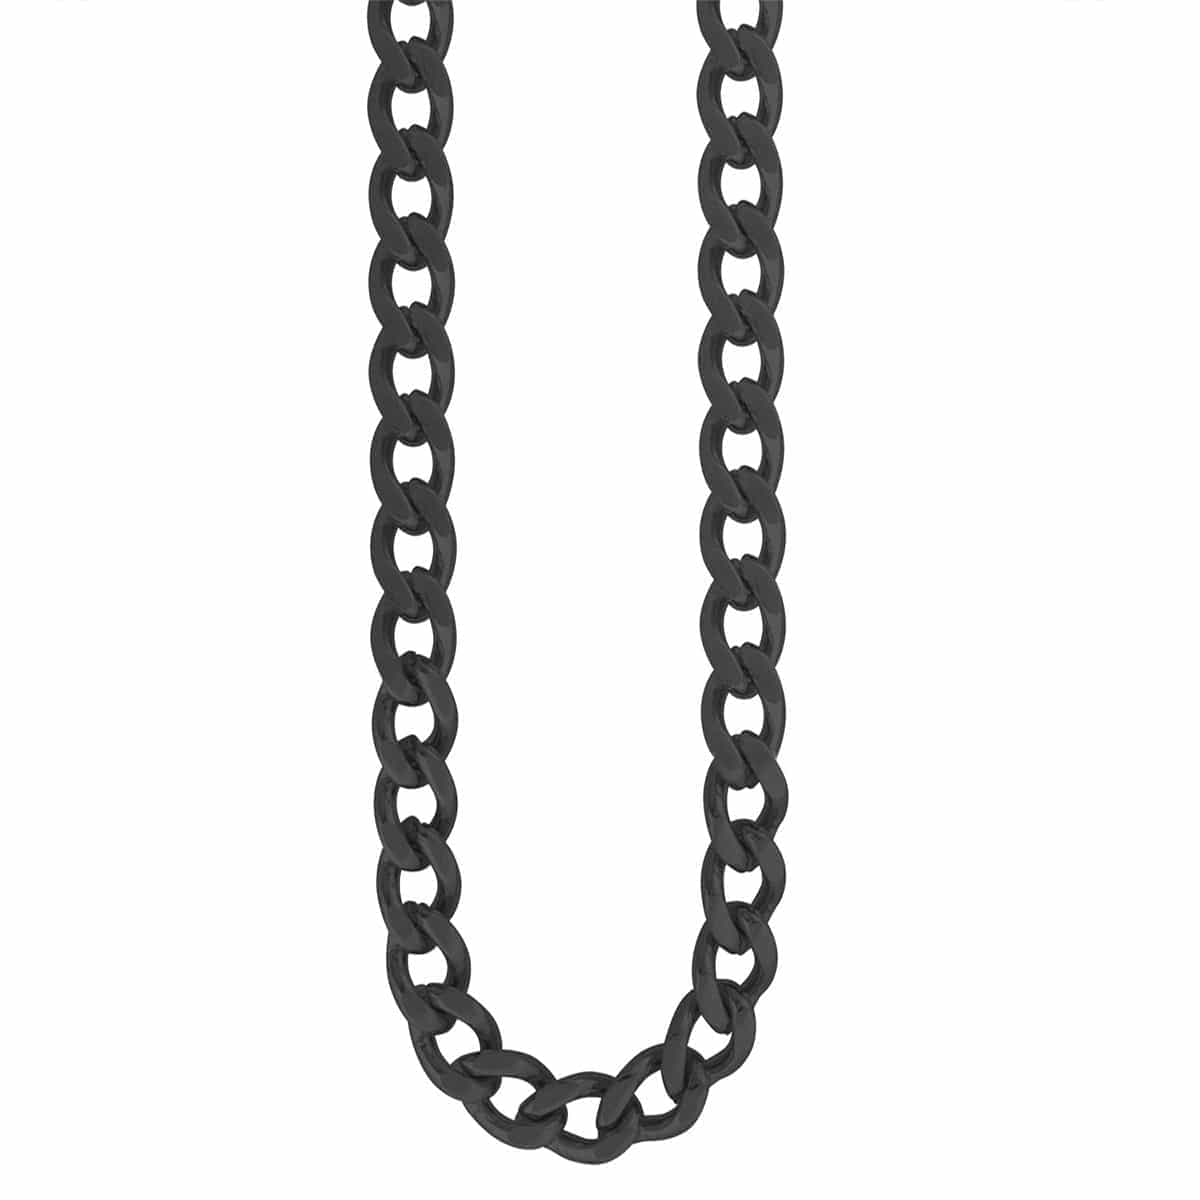 INOX JEWELRY Chains Black Stainless Steel 4mm Flat Curb Polished Chain